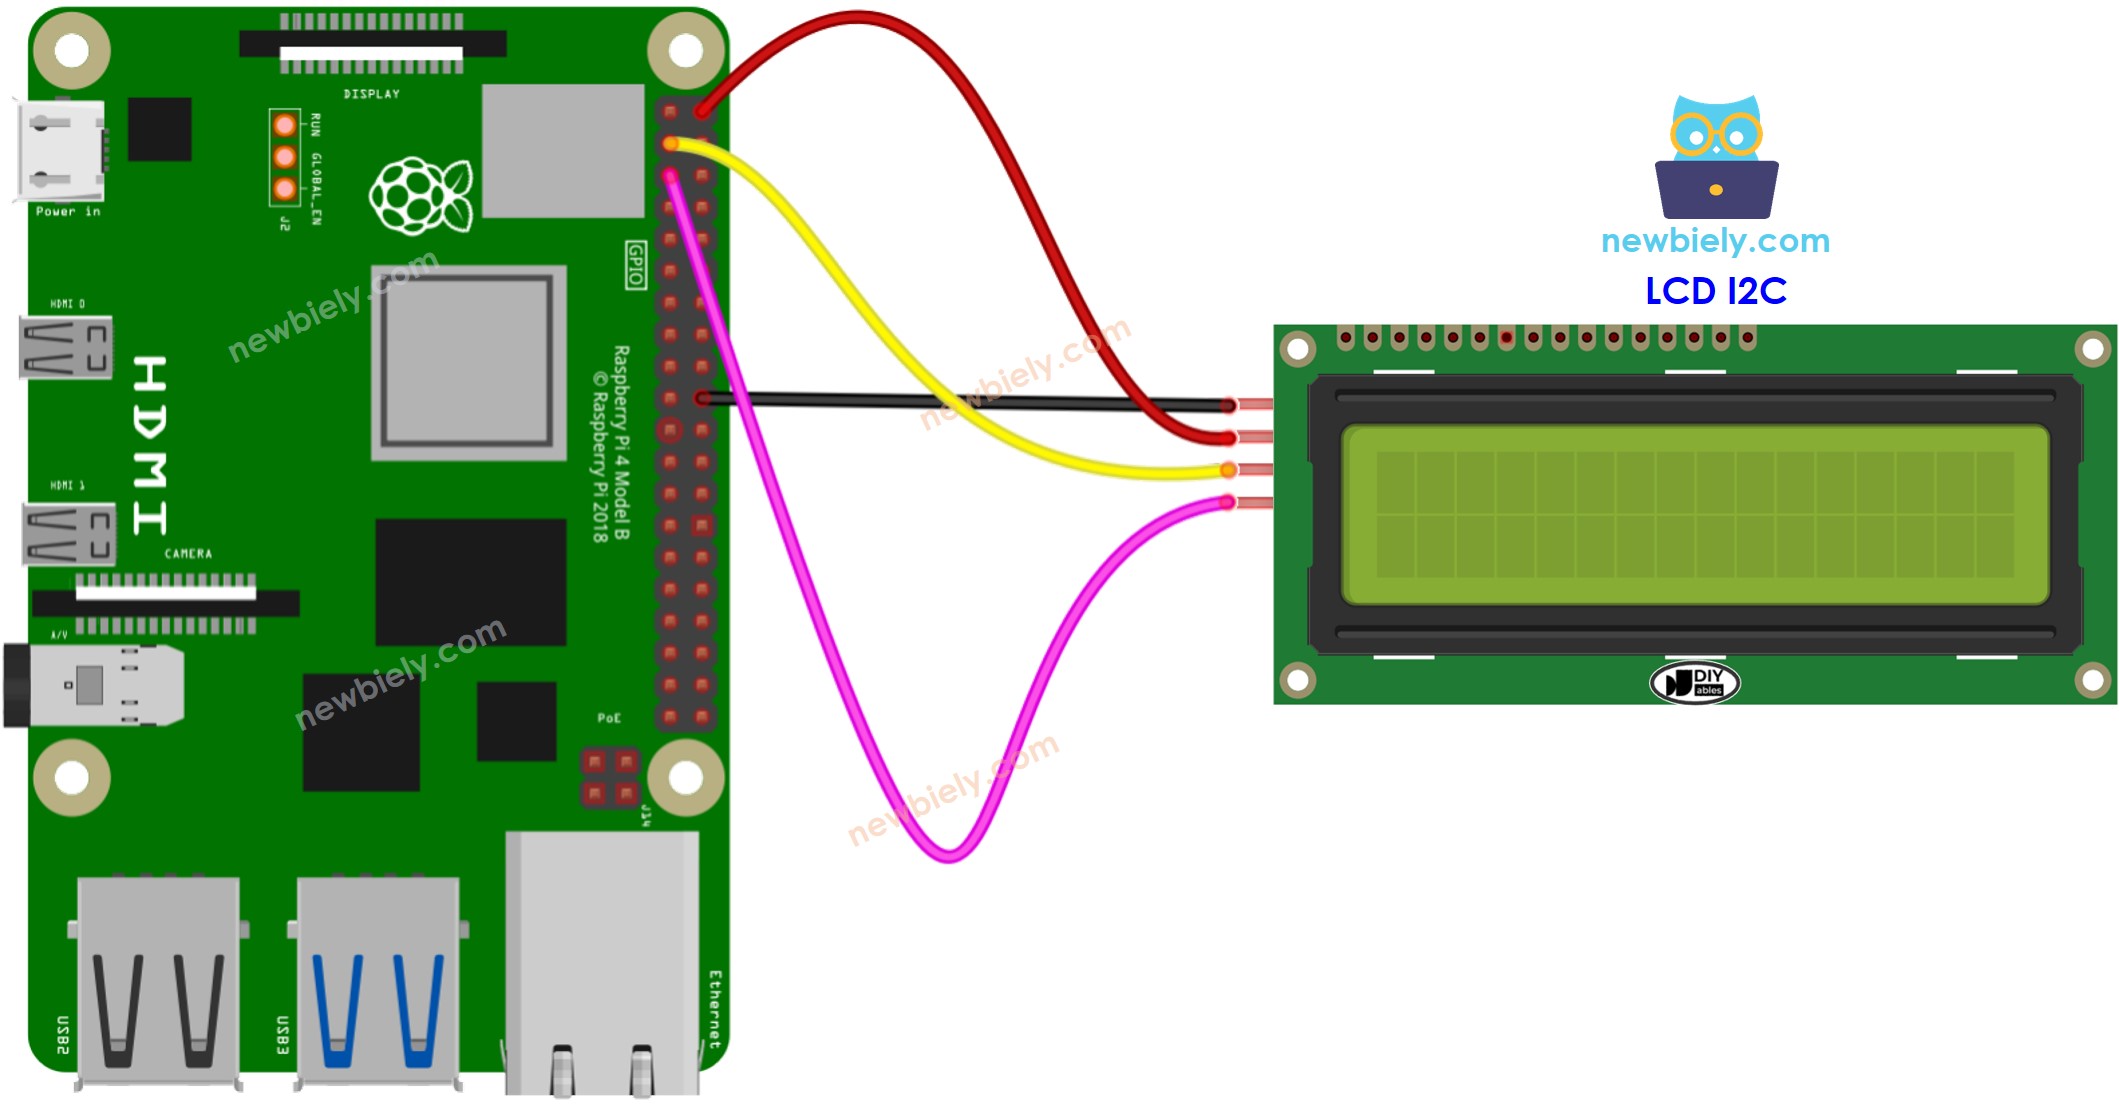 The wiring diagram between Raspberry Pi and LCD I2C